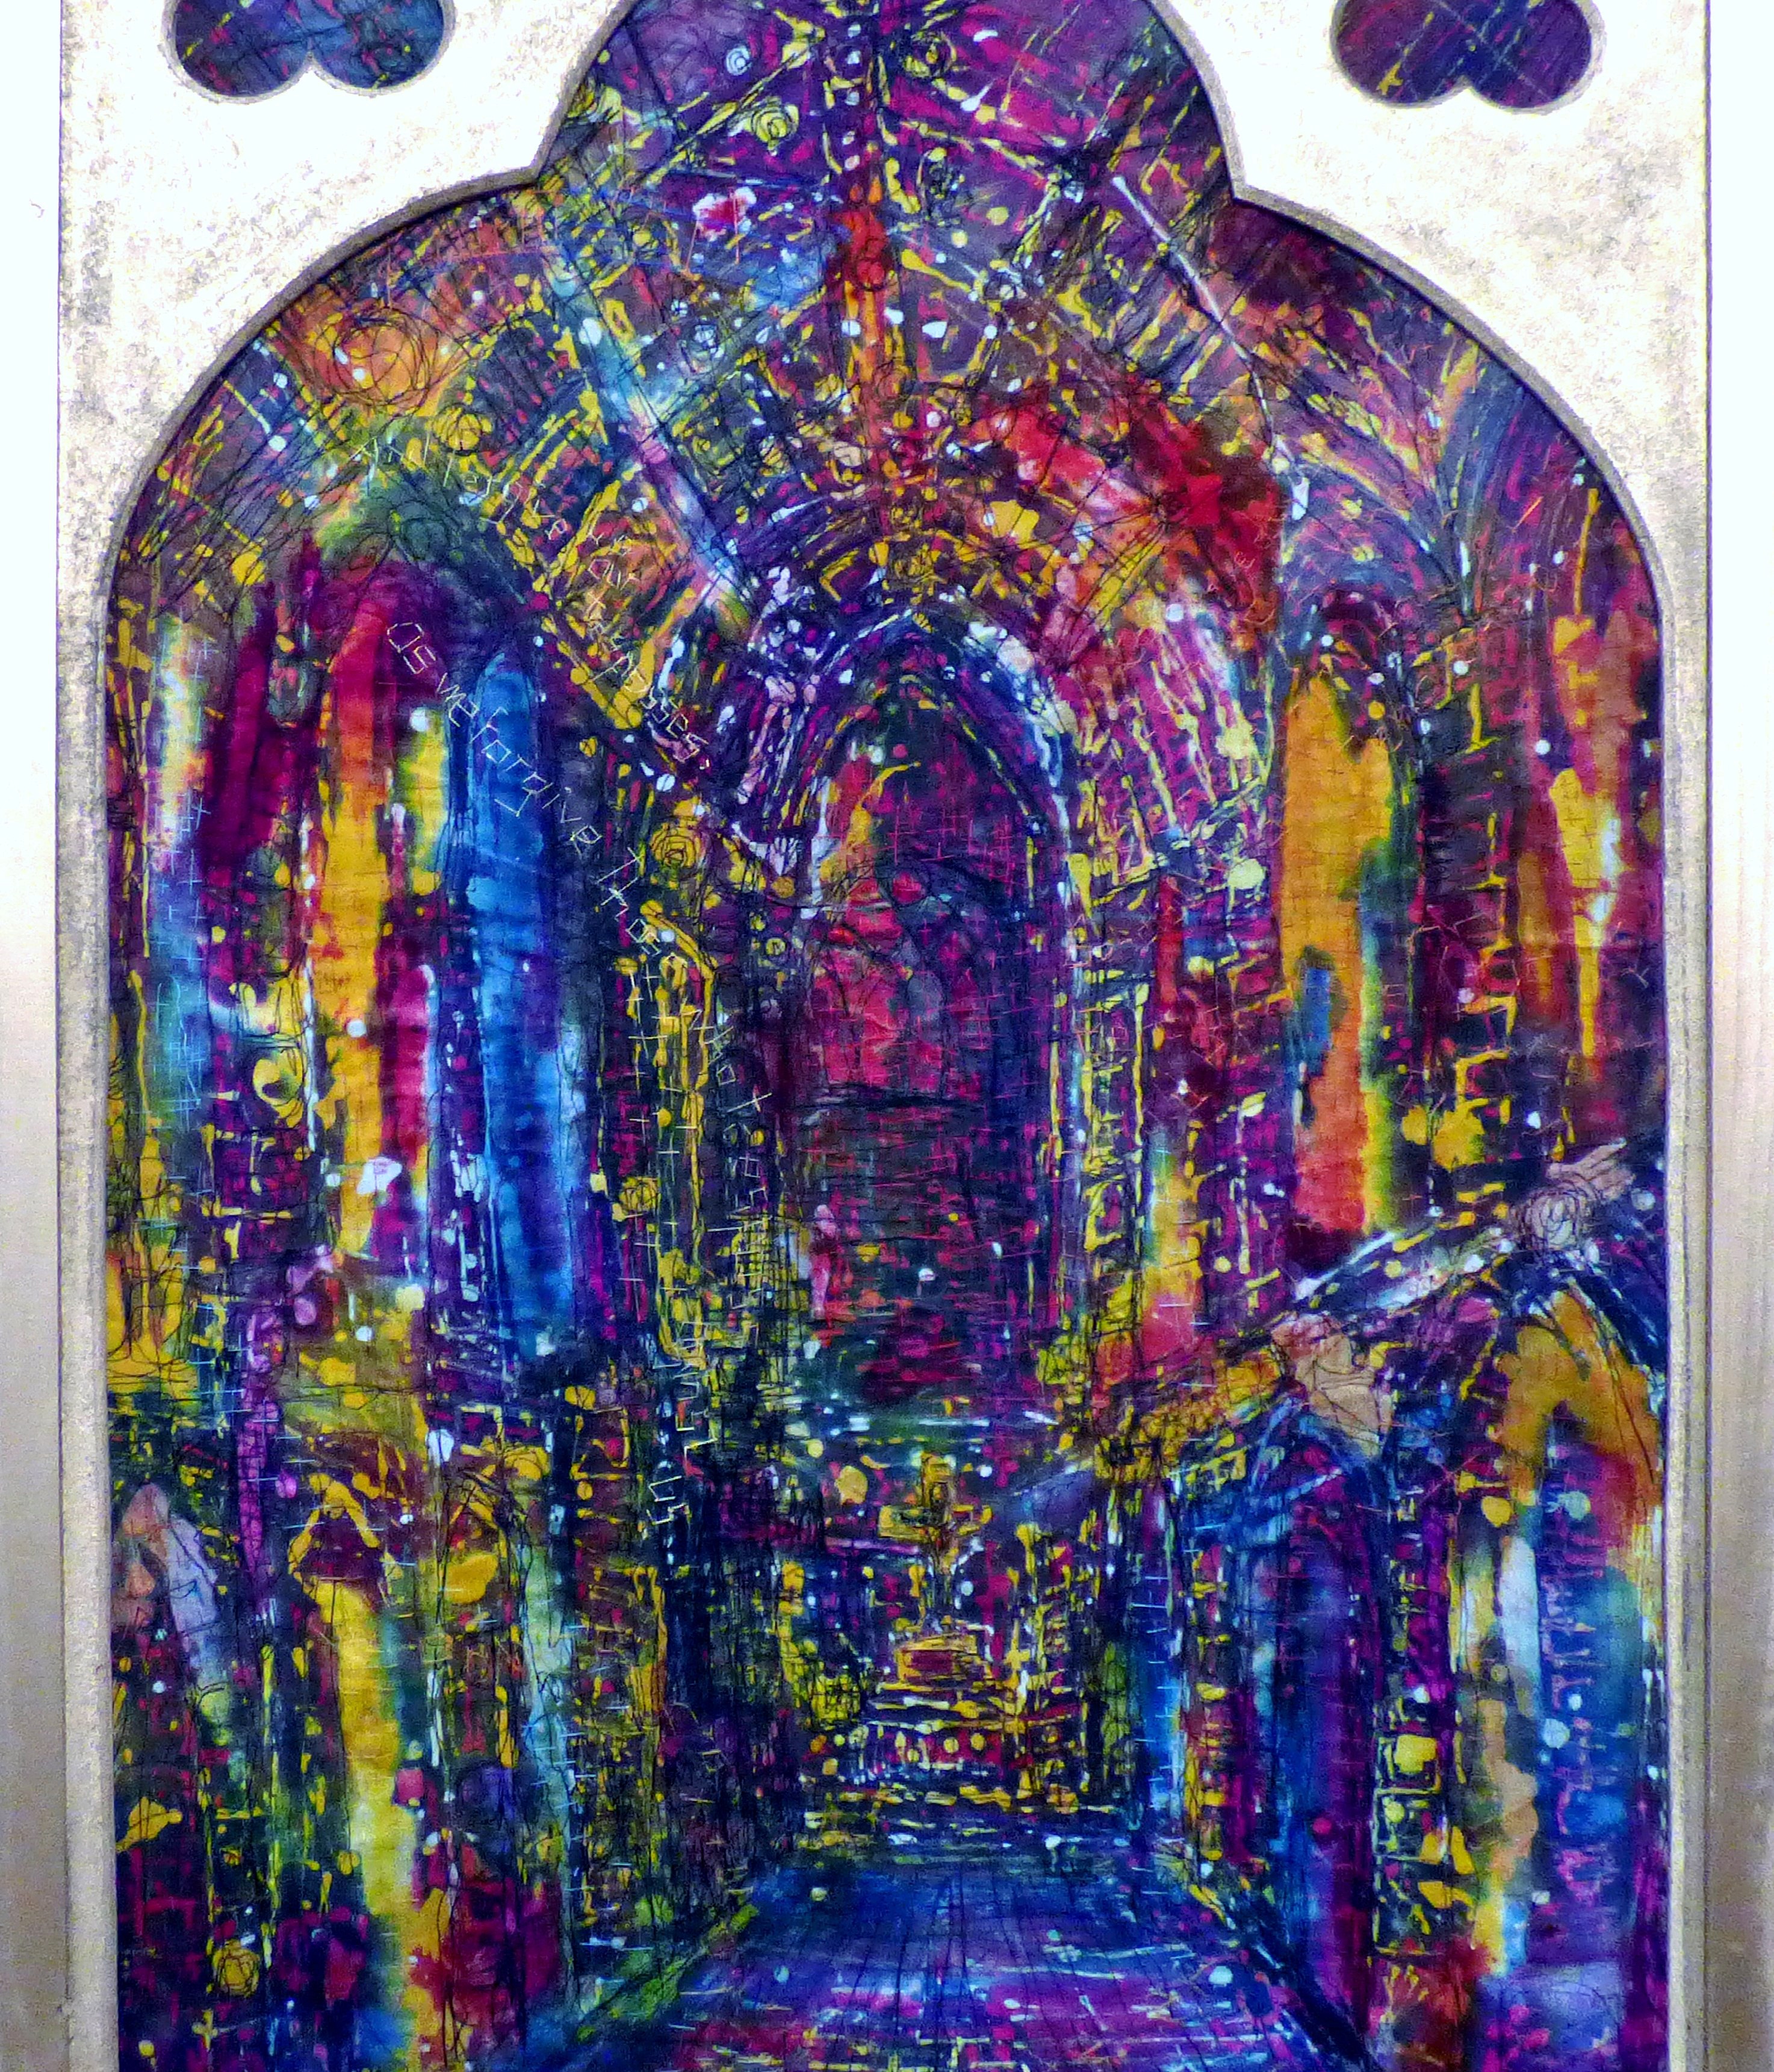 TIME PRESENT AND TIME PAST by Anne Johnson, batik, In All Its Glory exhibition, Chester Cathedral 2016